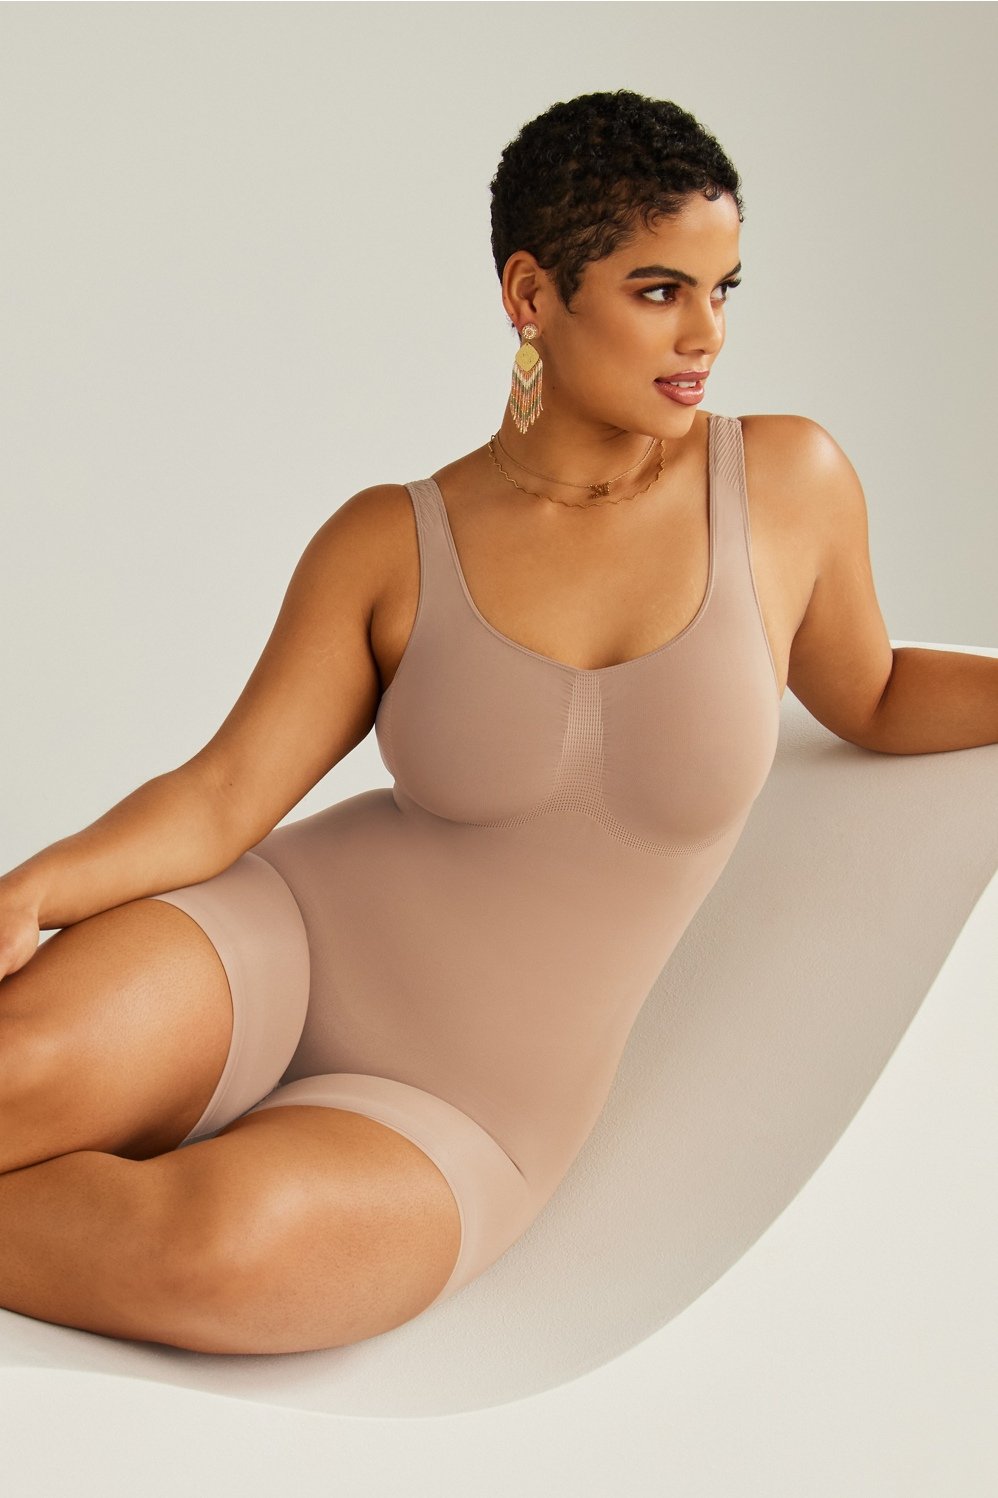 Nearly Naked Shaping Mid Thigh Bodysuit - Fabletics